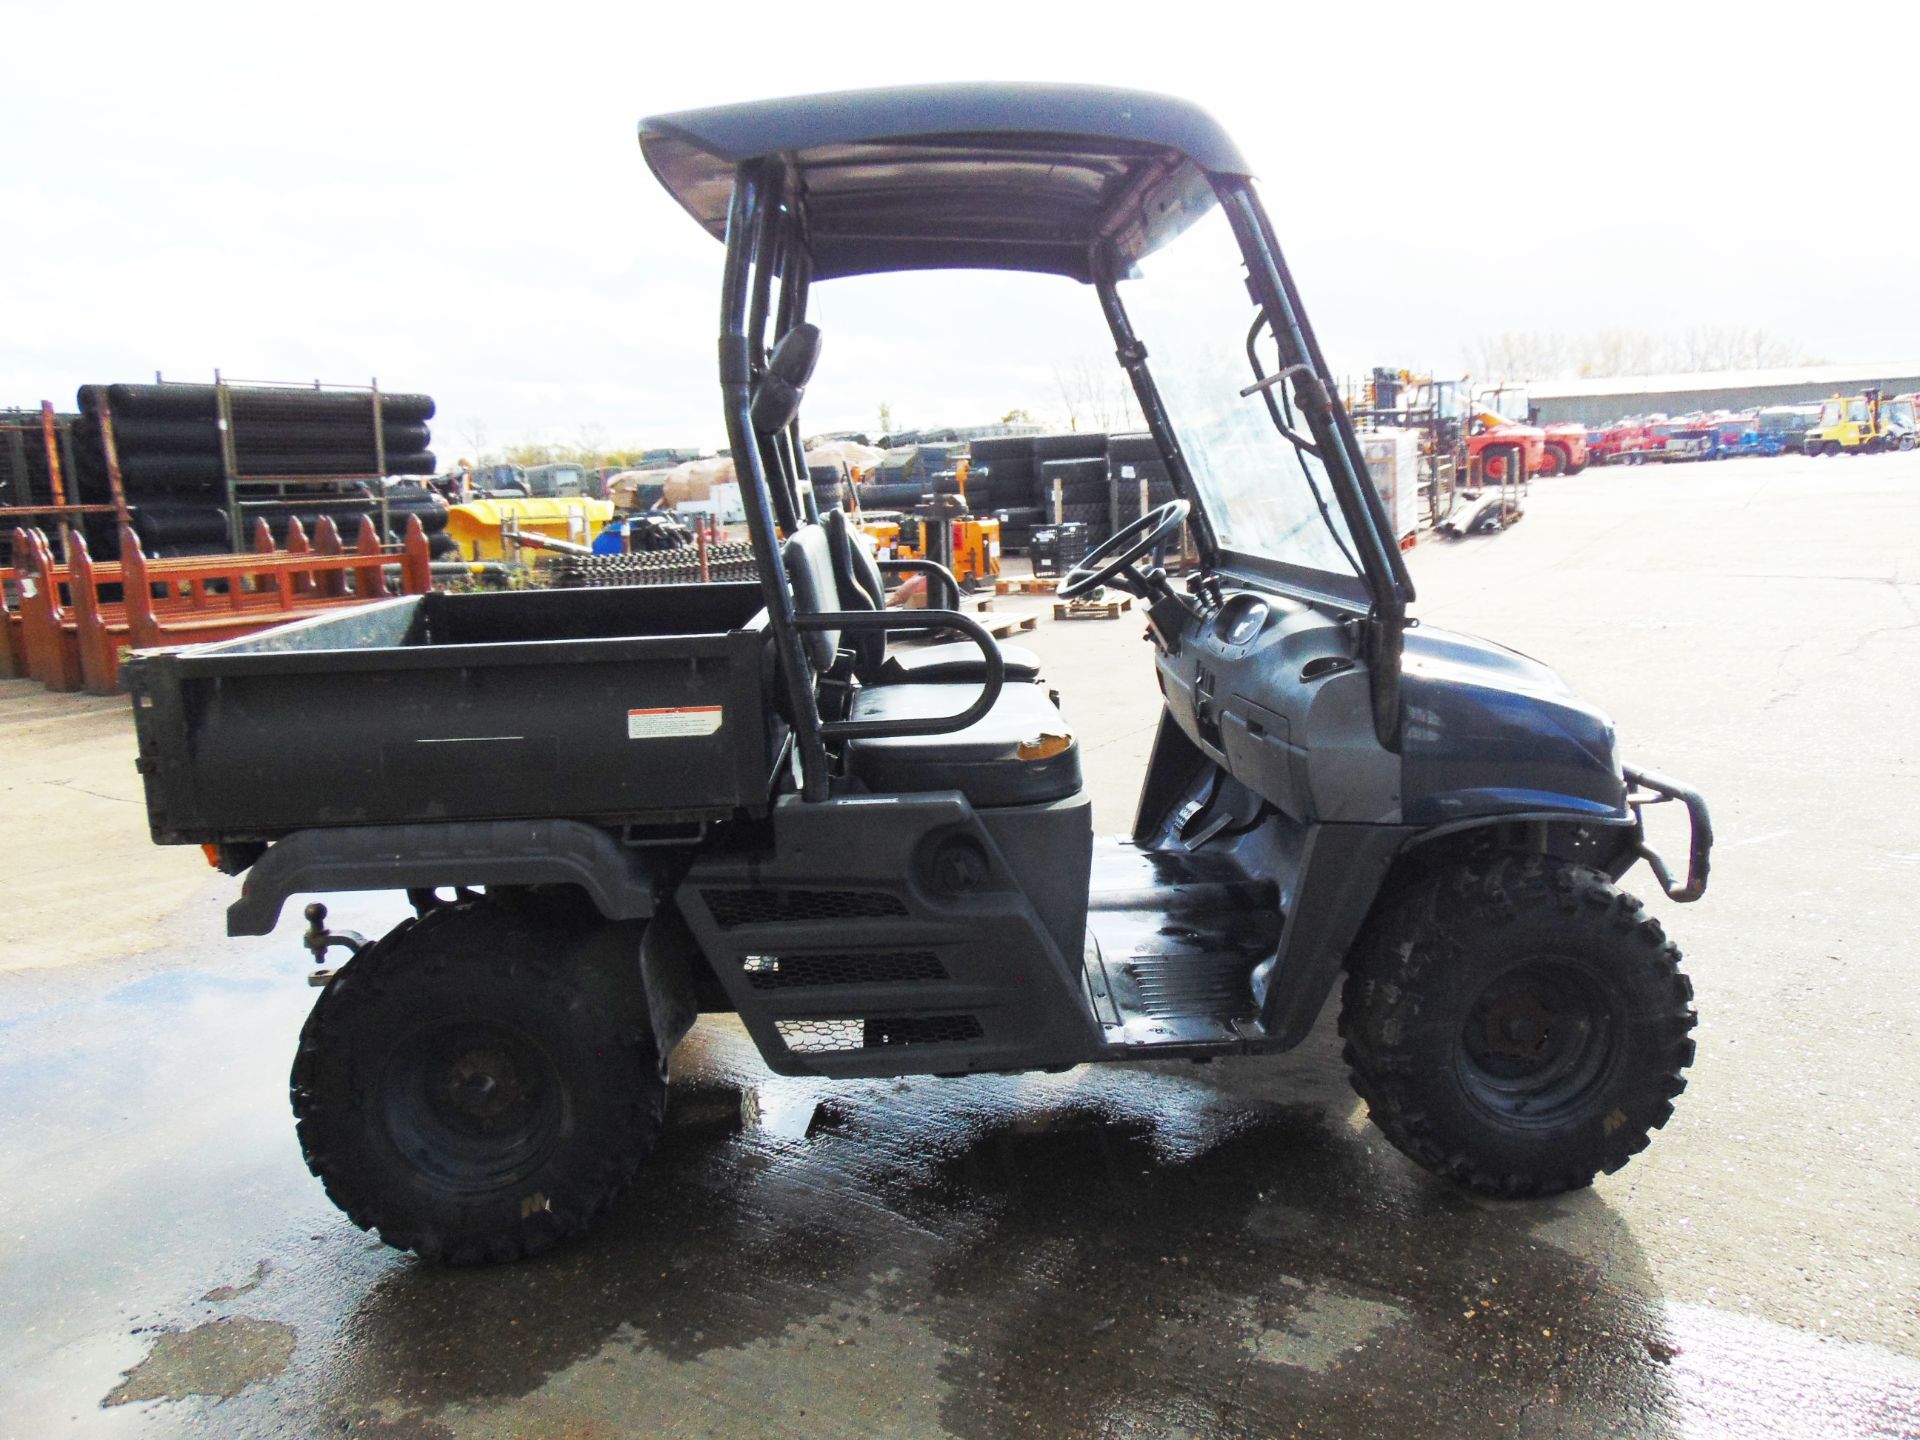 2013 Cushman XD1600 4x4 Diesel Utility Vehicle Showing 217 hrs - Image 7 of 17